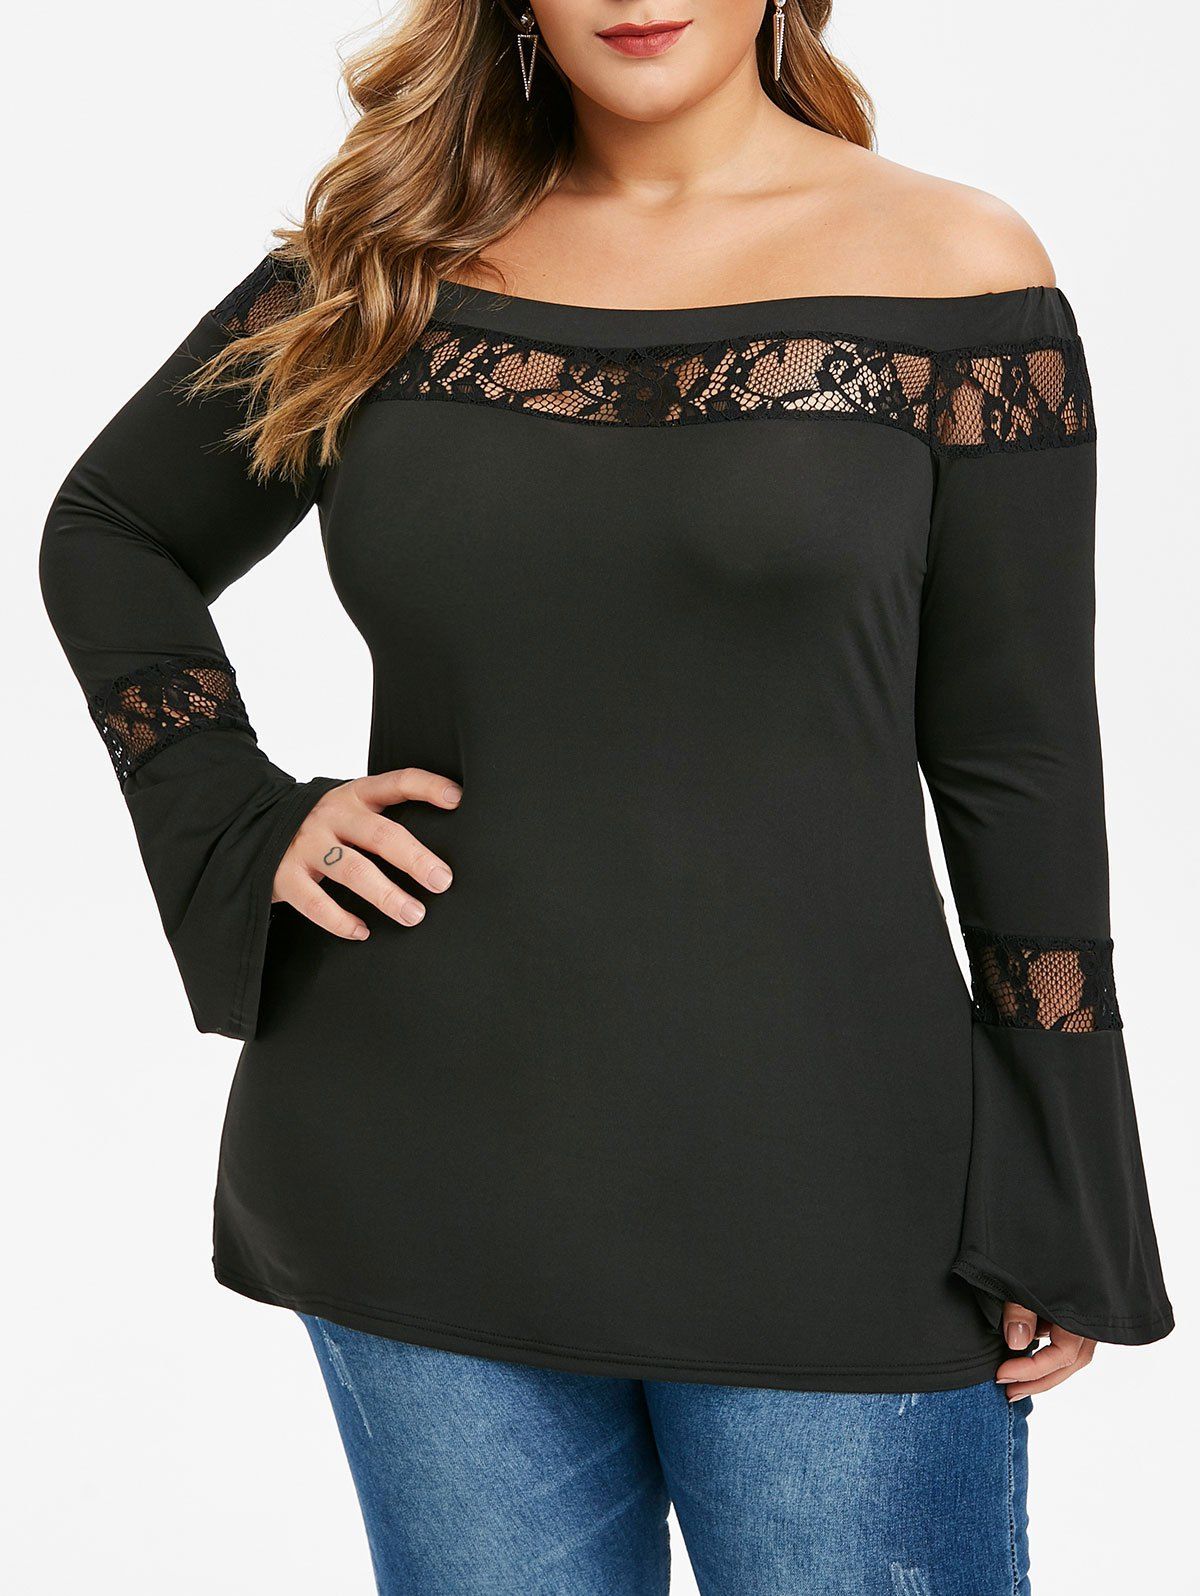 Lace Panel Bell Sleeve Plus Size Off The Shoulder Top